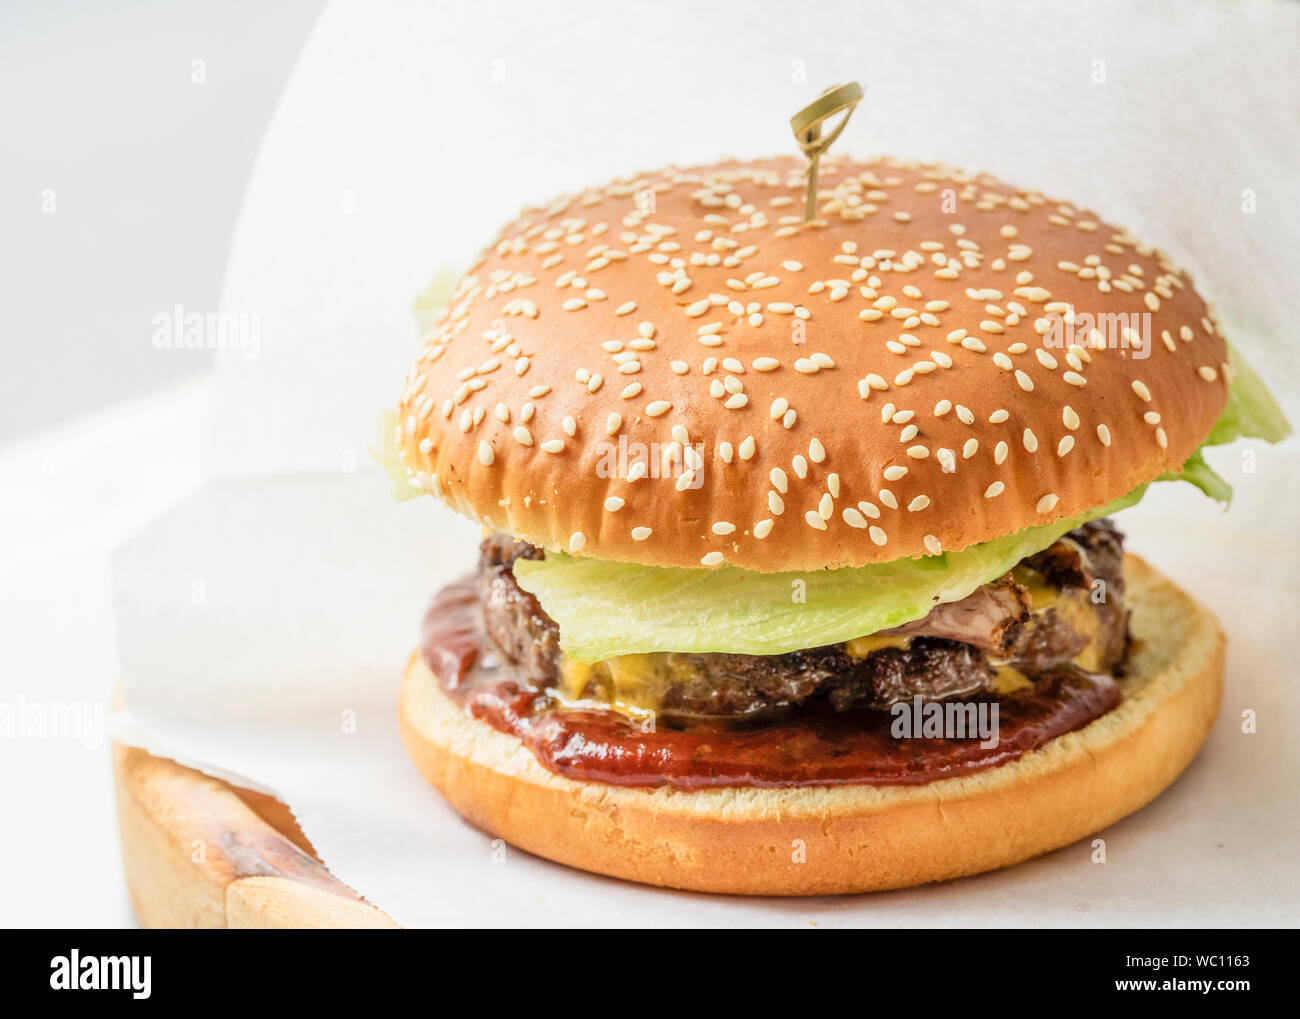 Close-up Of Fresh Burger With Camembert Cheese On White Wax Paper In Plate Stock Photo